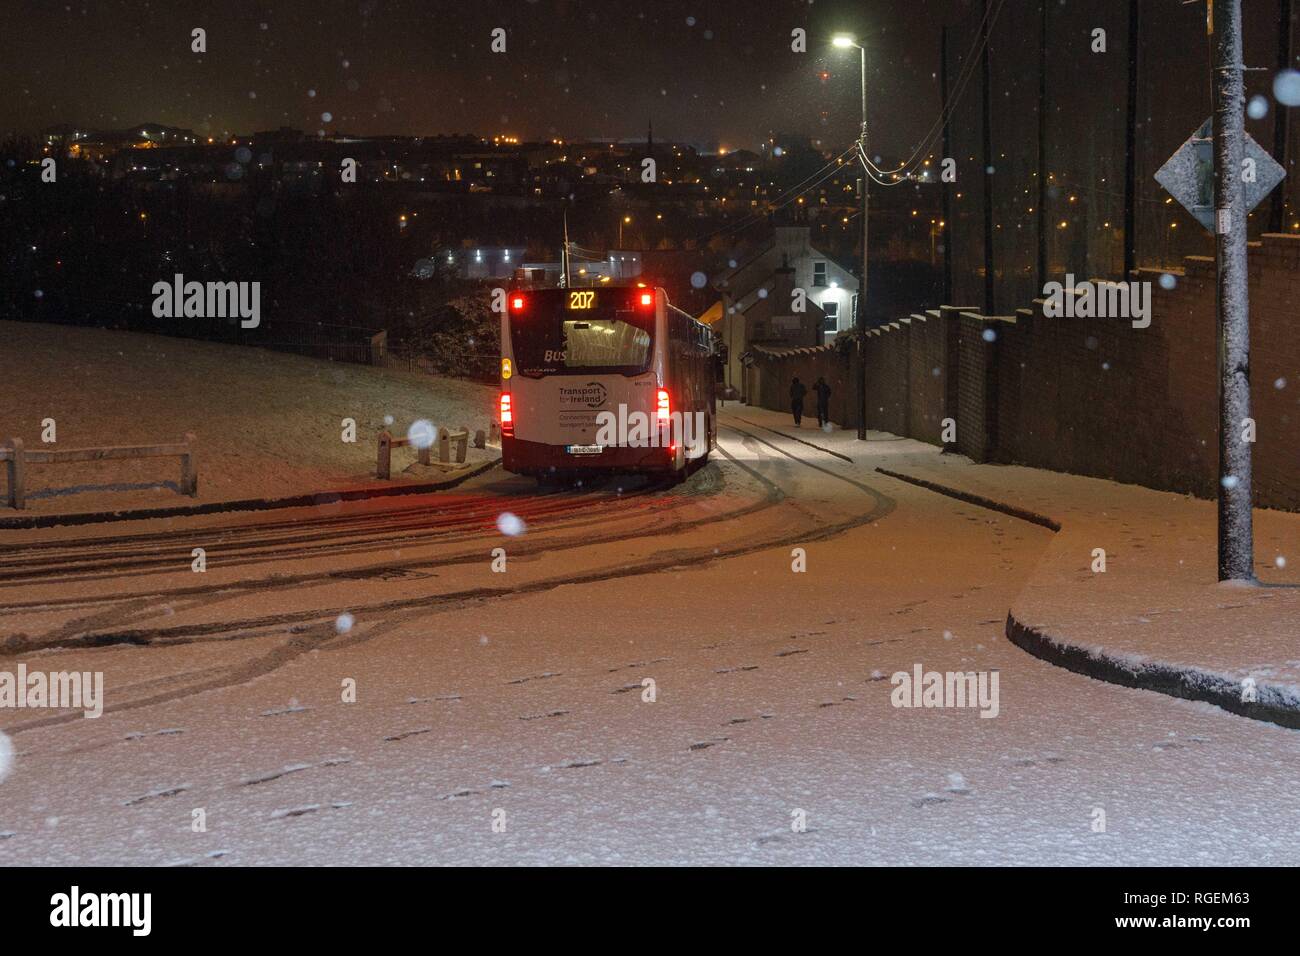 Cork, Ireland, 29th January, 2019.   Snow in Ballyvolane, Cork City. Today a Yellow Weather Warning was put in place accross the country by MET Eireann for ice and snow. Heavy snowfall hit parts of Cork City and County throughout the day making some roads treacherous and driving particulary dangerous throughout the city. Pictured here is the 207 bus making its way down Ballincollie Road. Credit: Damian Coleman/ Alamy Live News. Stock Photo